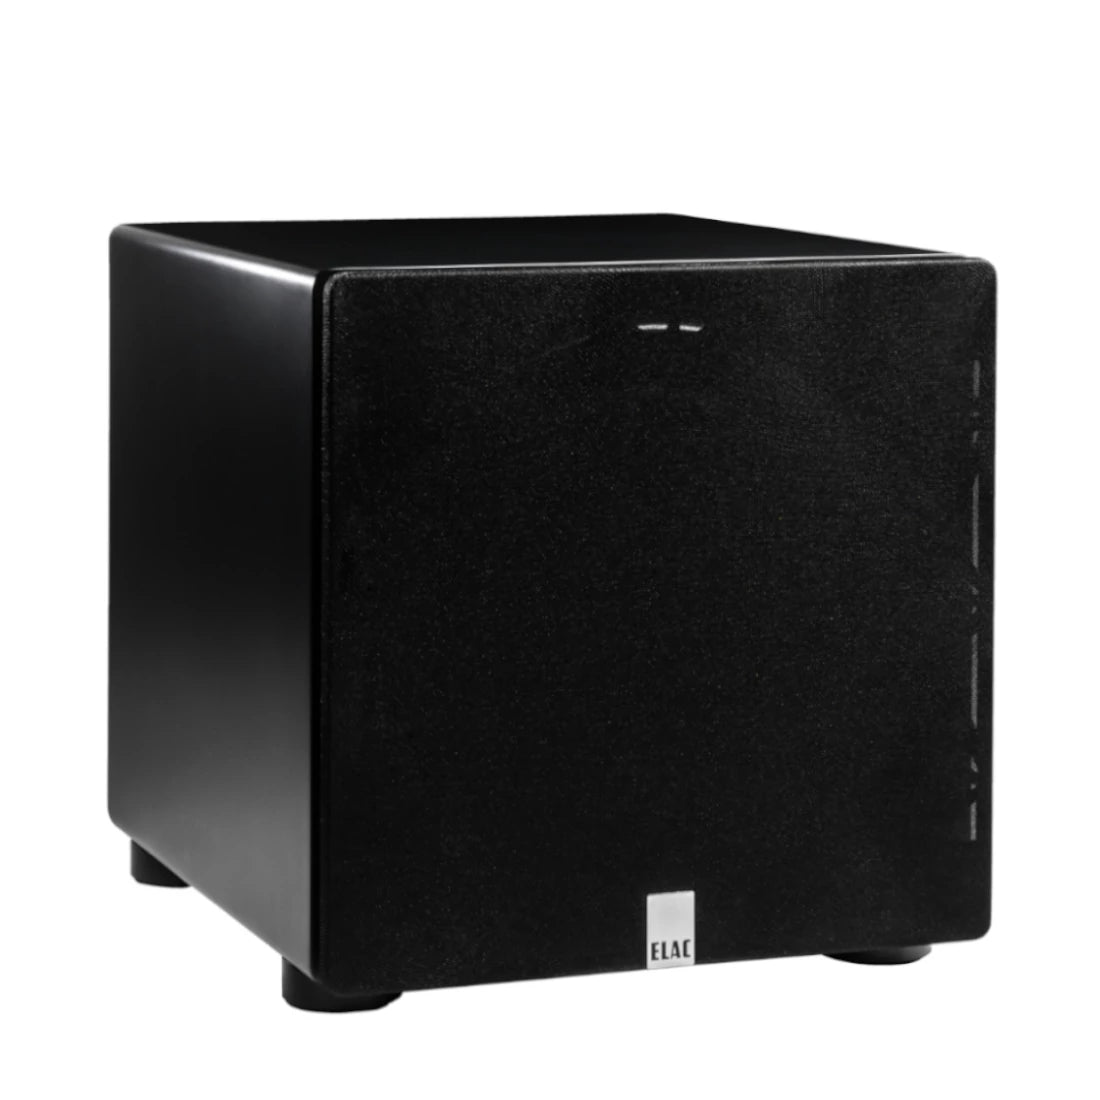 Elac Varro Reference RS700 12" Subwoofer with grille